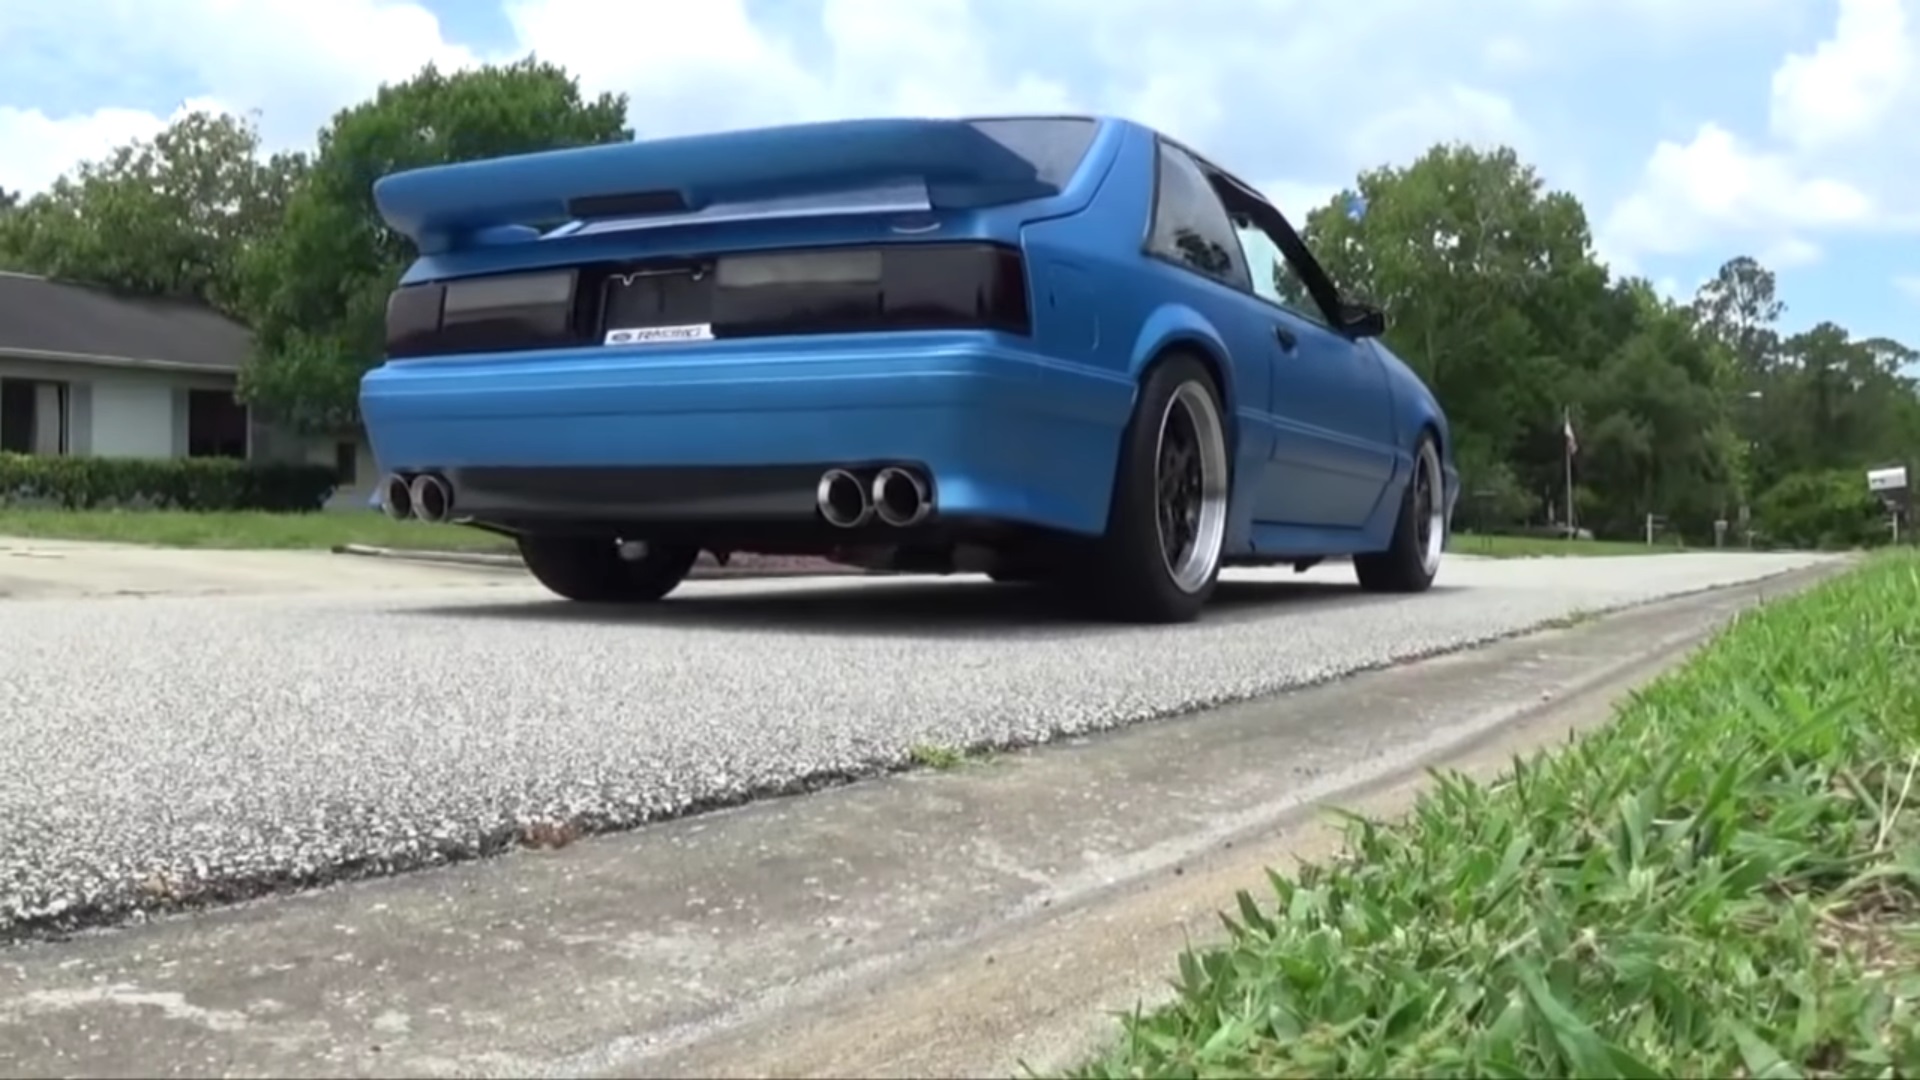 Video: 1991 Ford Mustang GT Fox Body 5.0 Exhaust Sound